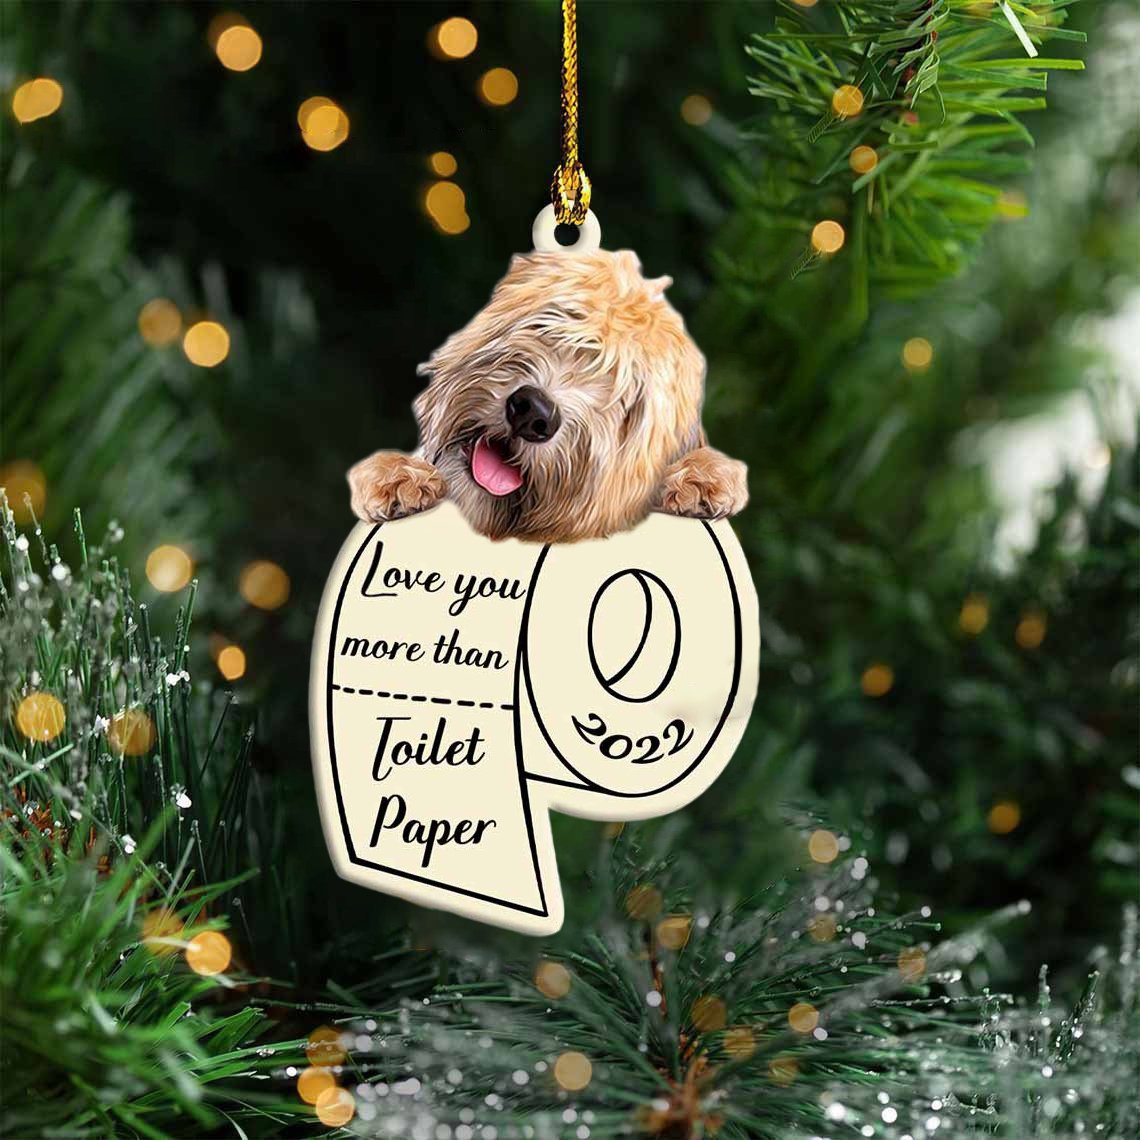 Wheaten Terrier Love You More Than Toilet Paper 2022 Hanging Ornament